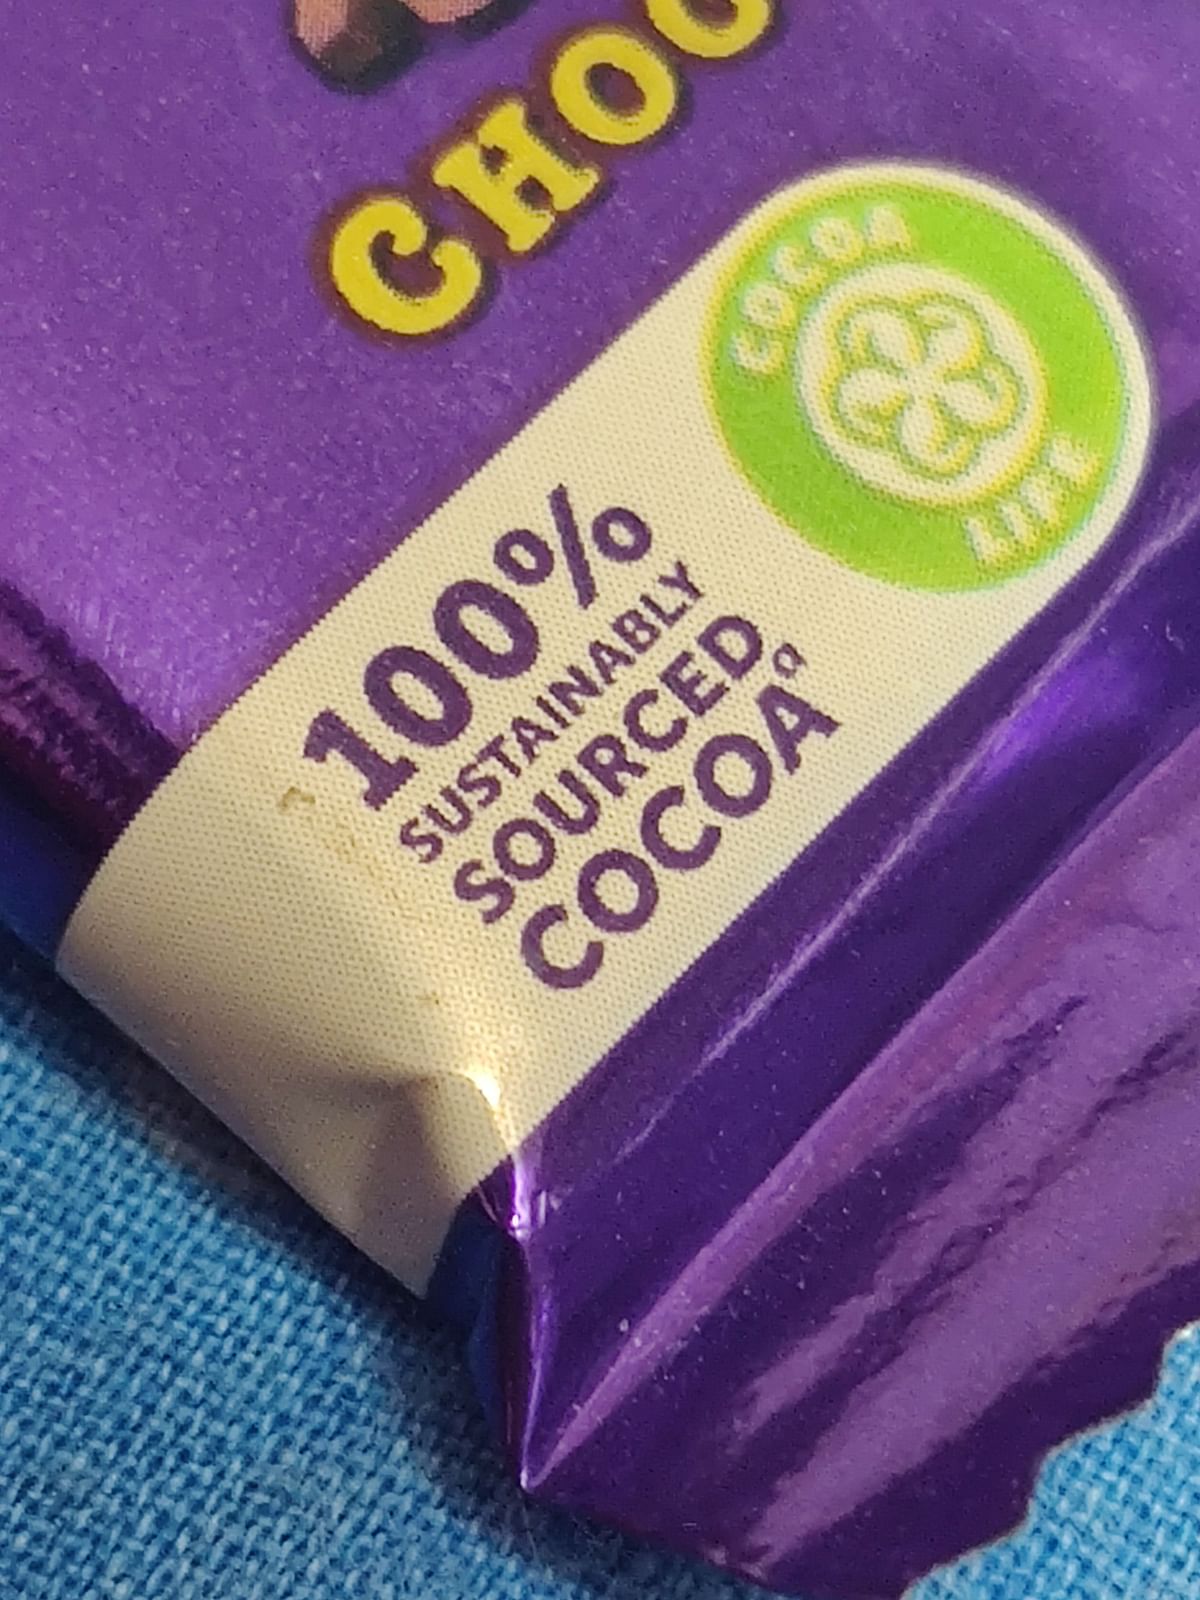 Cadbury Dairy Milk wrapper bears '100% sustainably sourced cocoa' tag